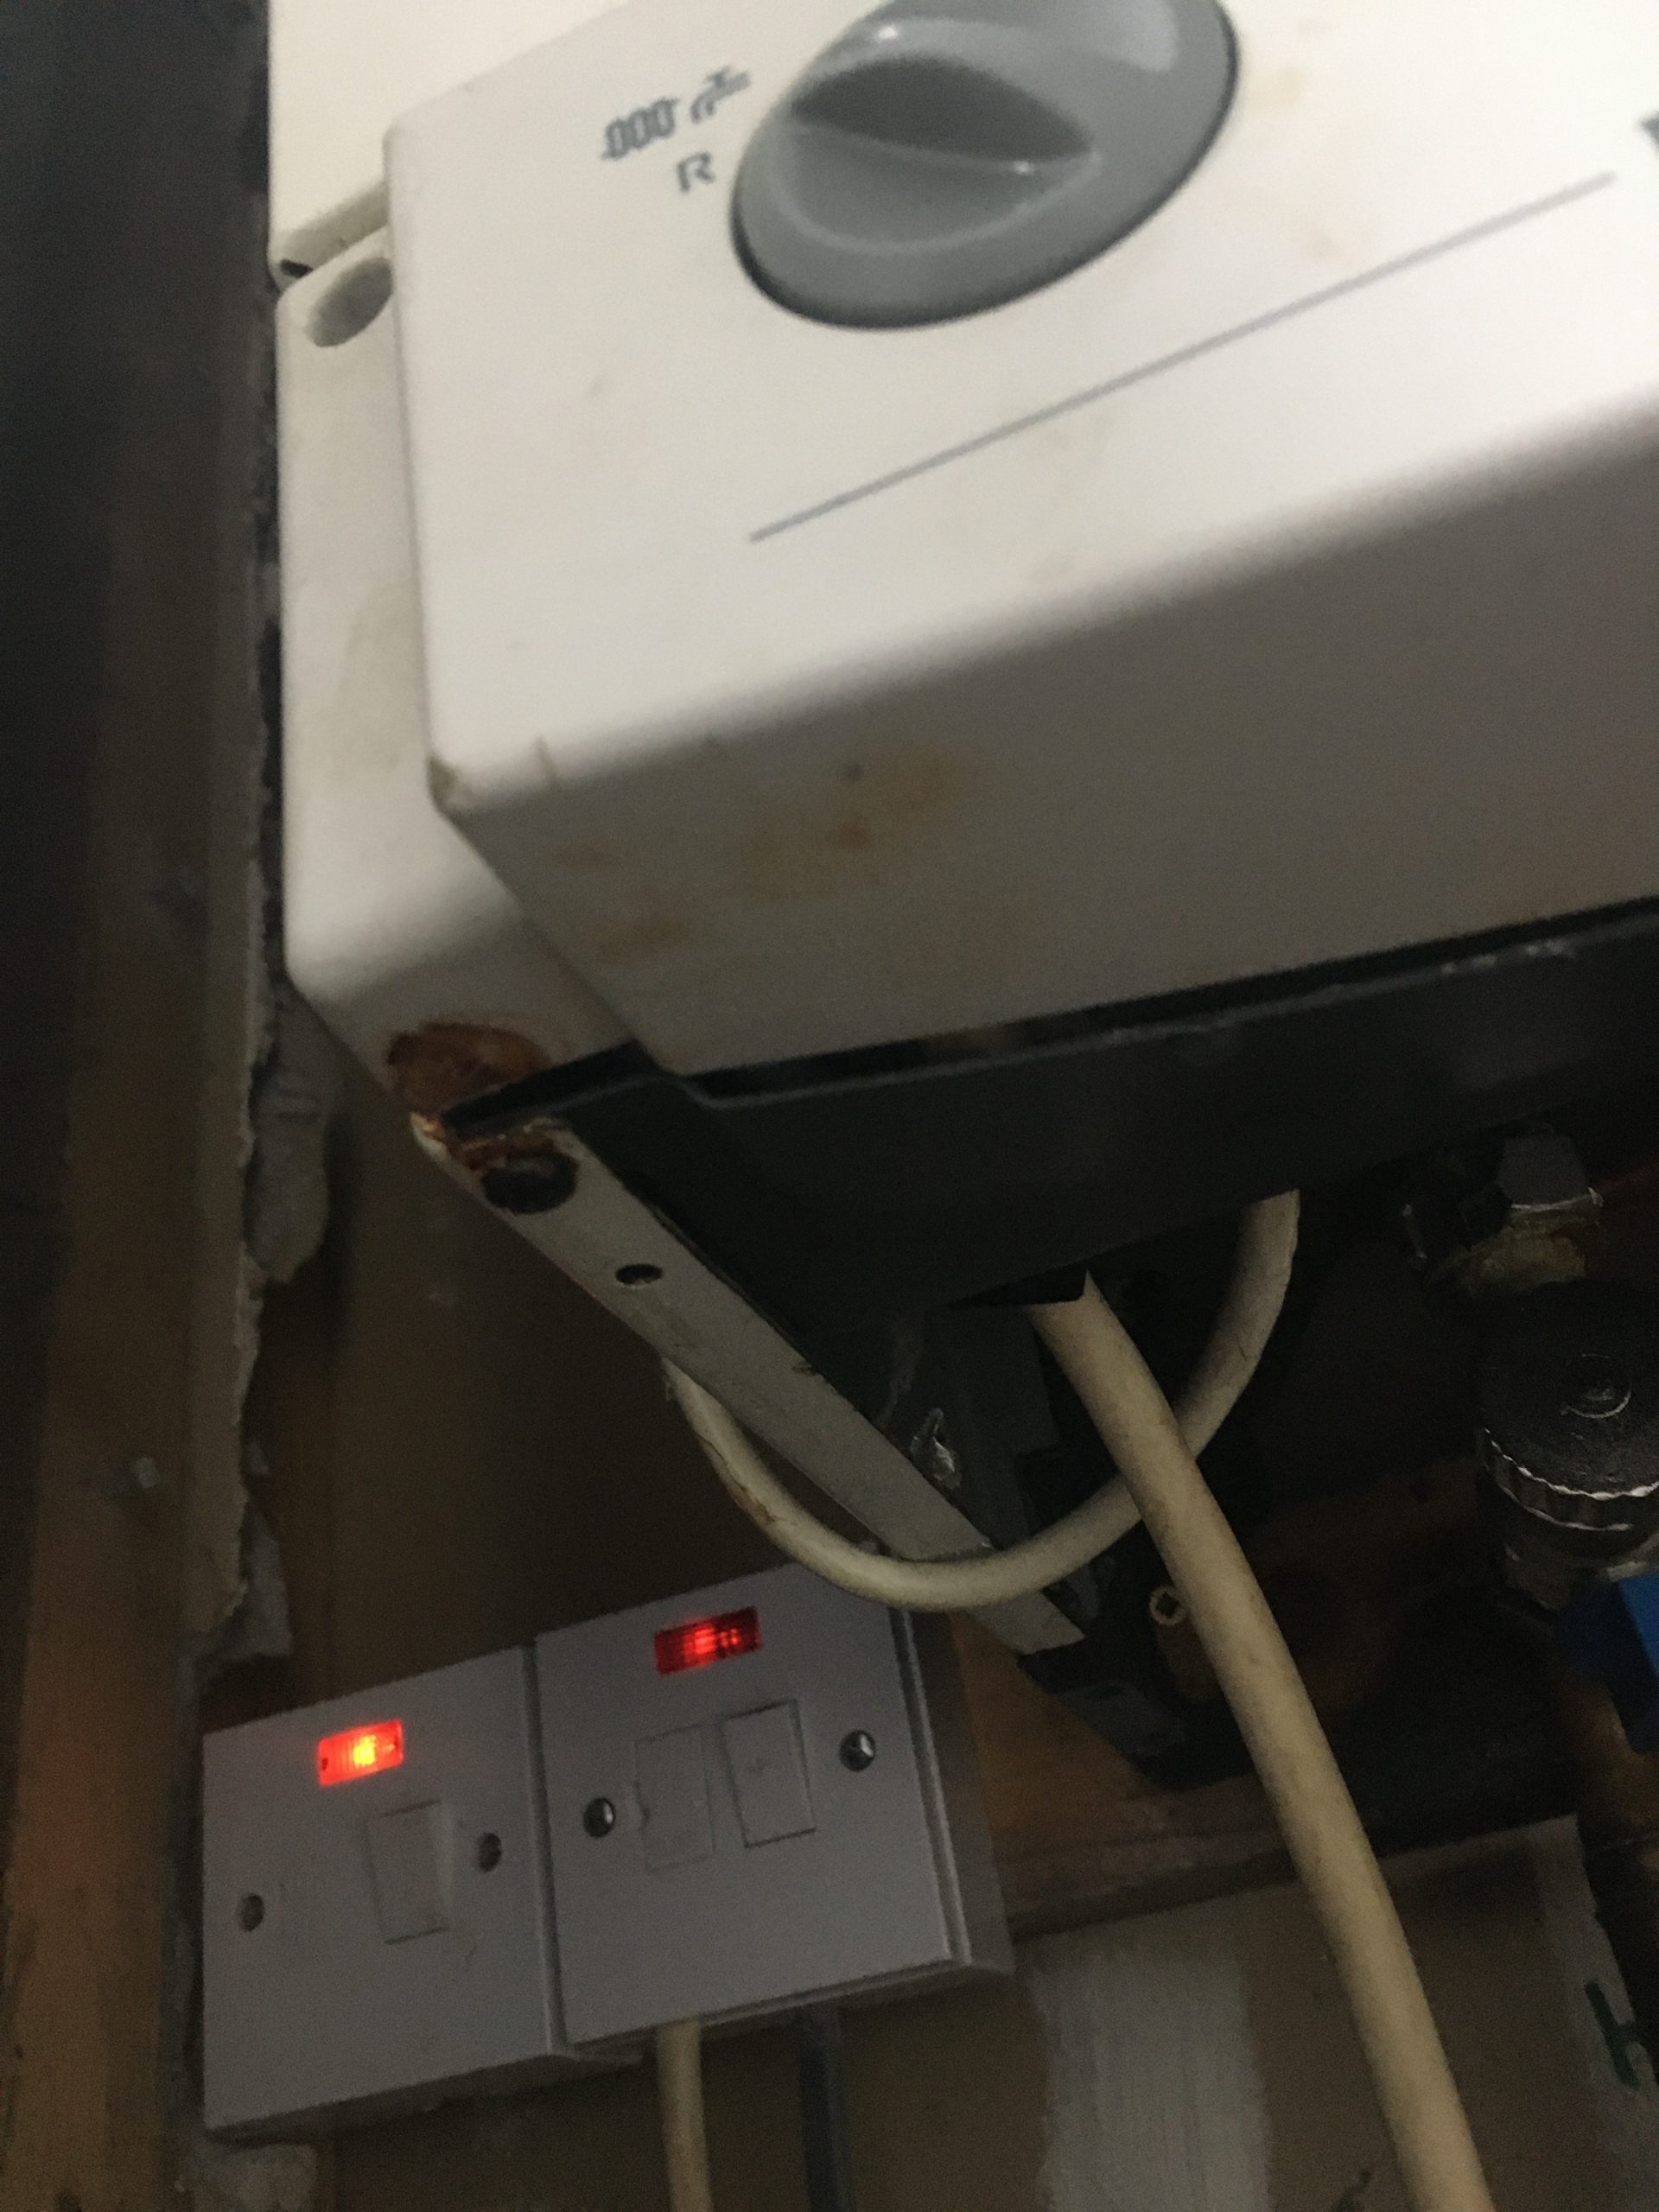 The boiler was leaking 